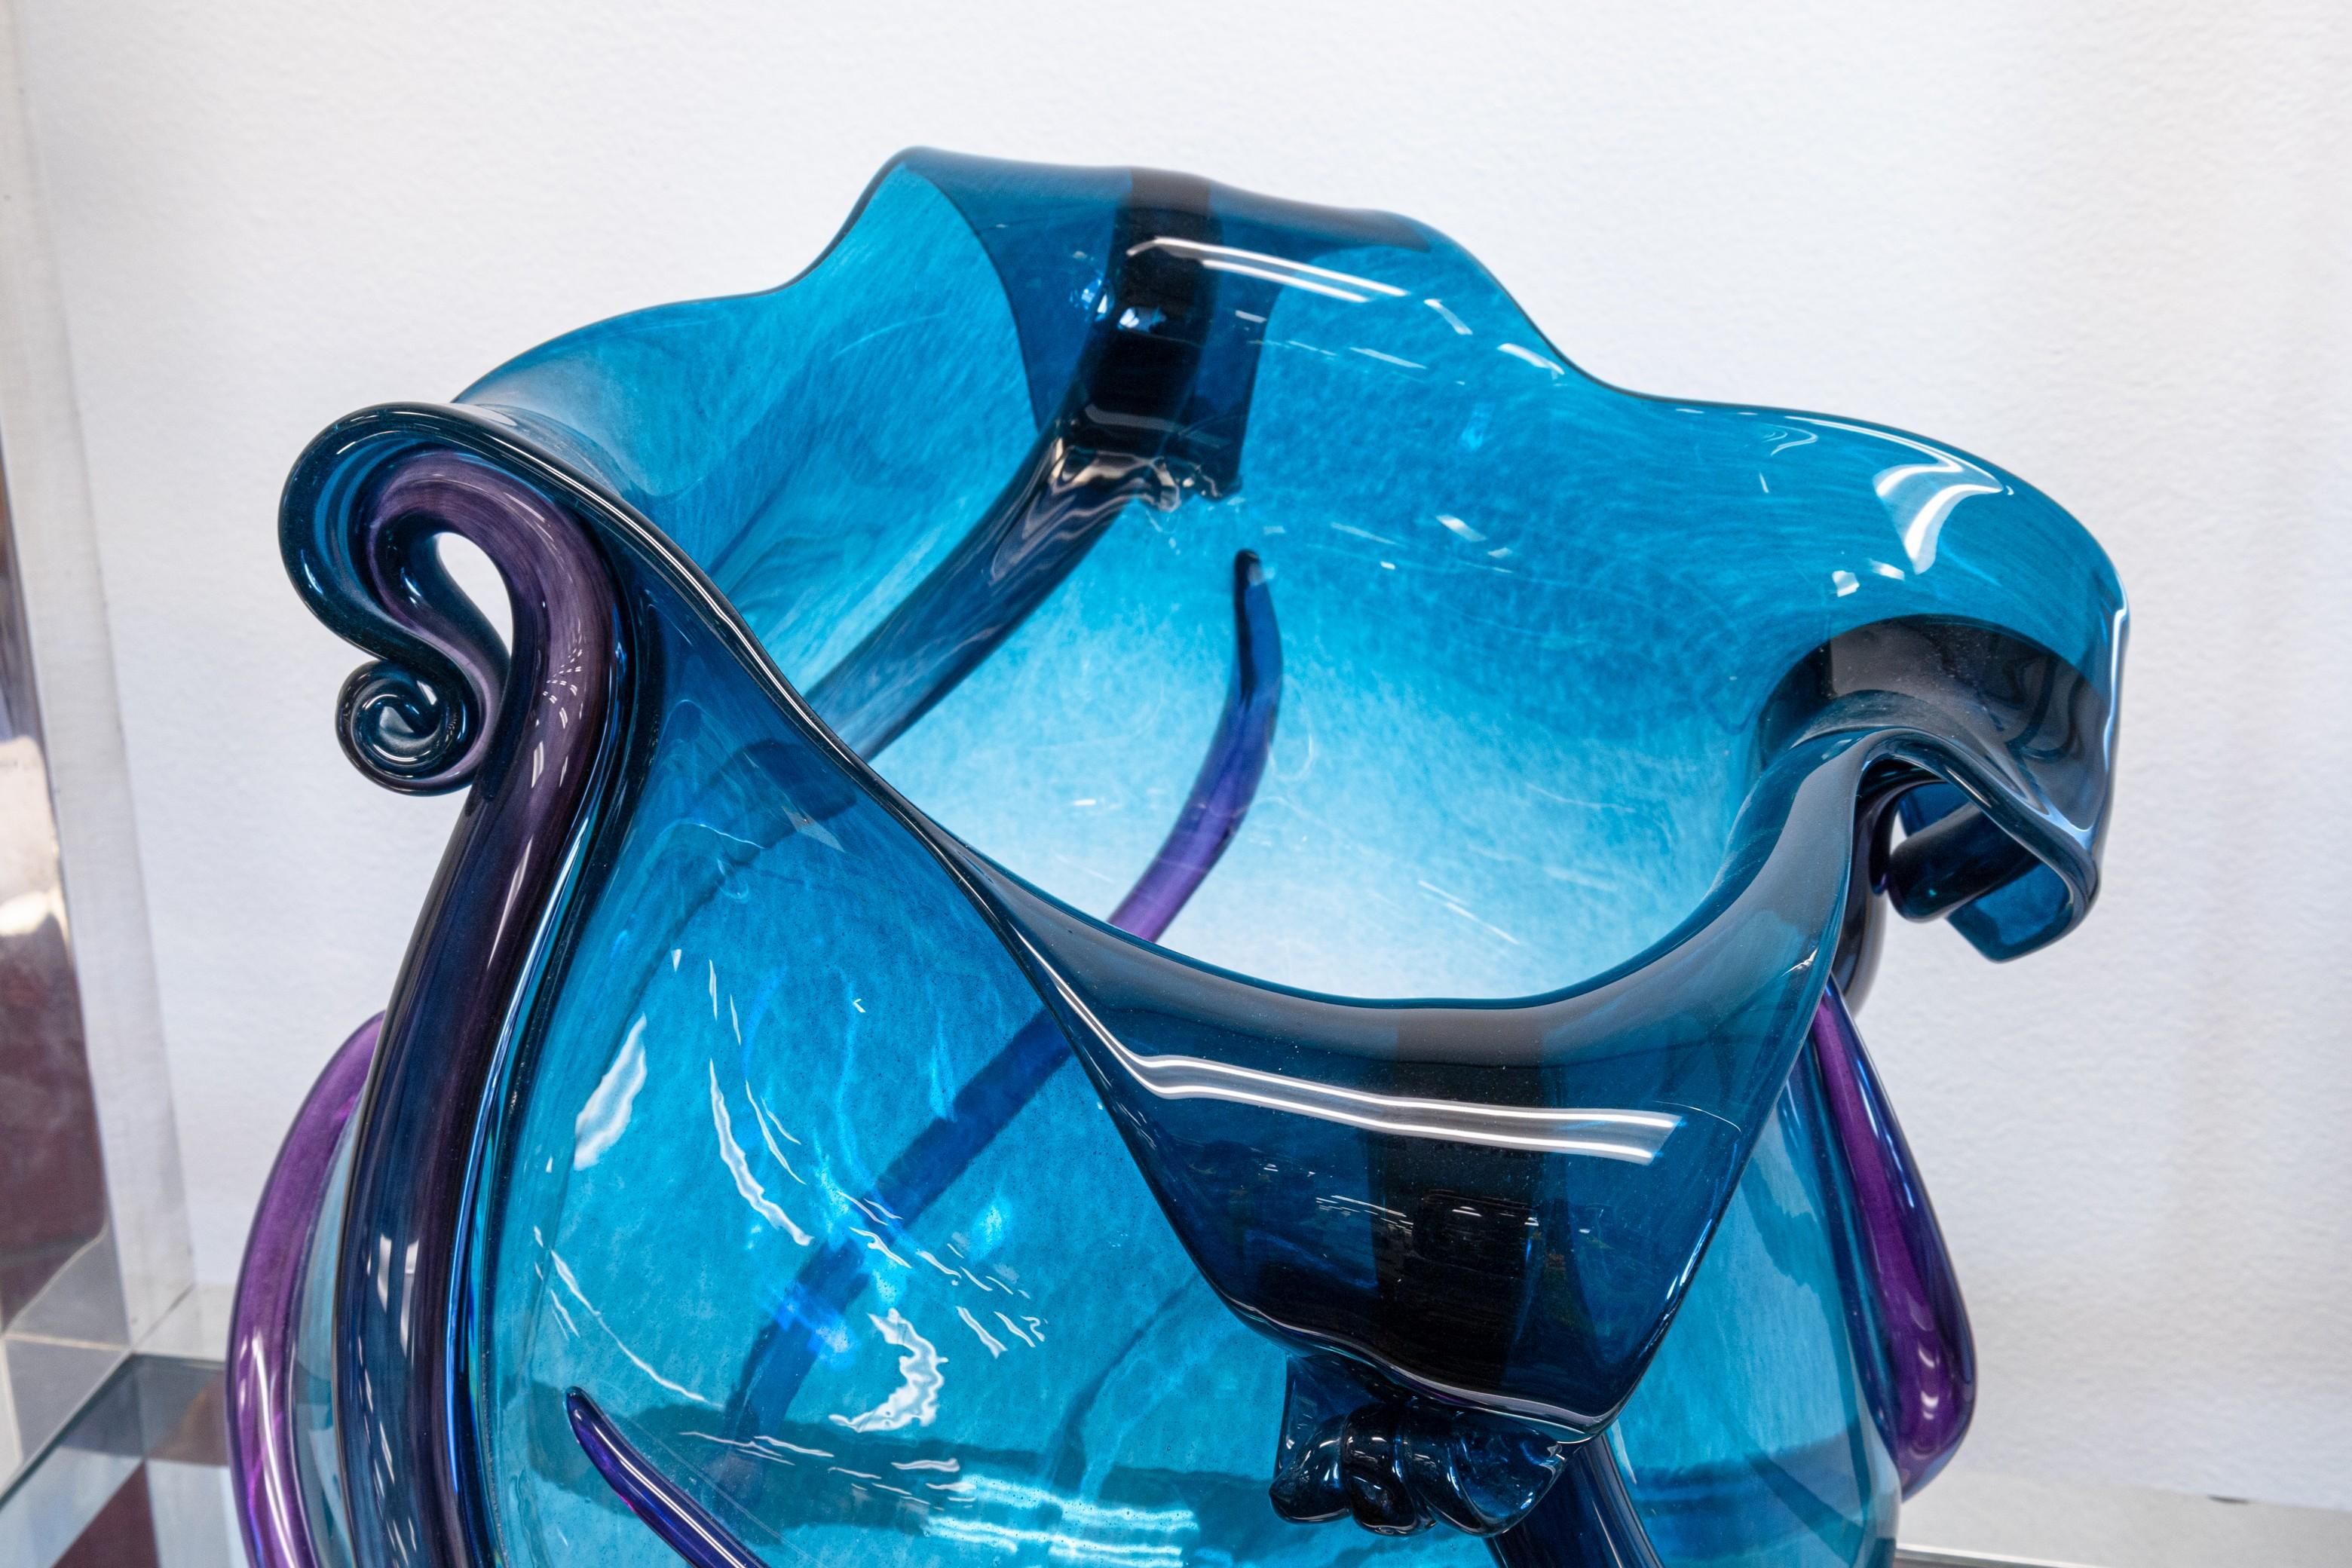 An Eric Lieberman blown glass vessel. A very pretty hand blown glass piece featuring a gorgeous combination of blues and purples with swirling strips of glass and curled rims. This piece is signed and dated 1997 on the base. It is in very good